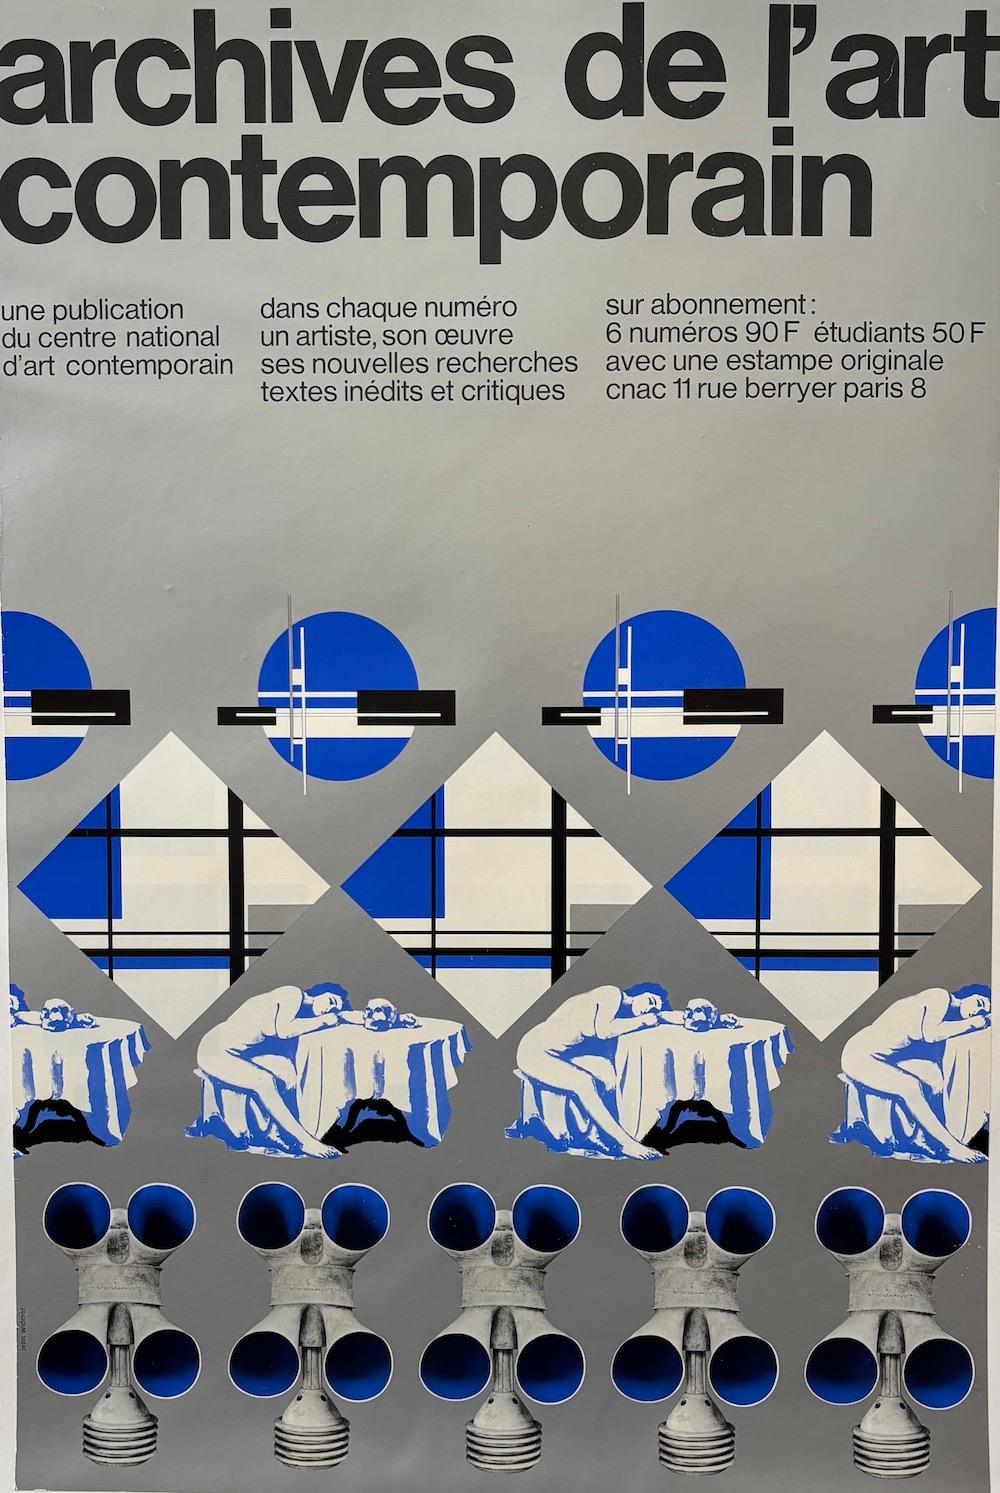 Jean Widmer Original Poster, 'Archives De L’art Contemporain', Circa 1970 

Jean Widmer (1930-2014) was a Swiss graphic artist who made significant contributions to the field of graphic design. Associated with the influential Swiss design movement,